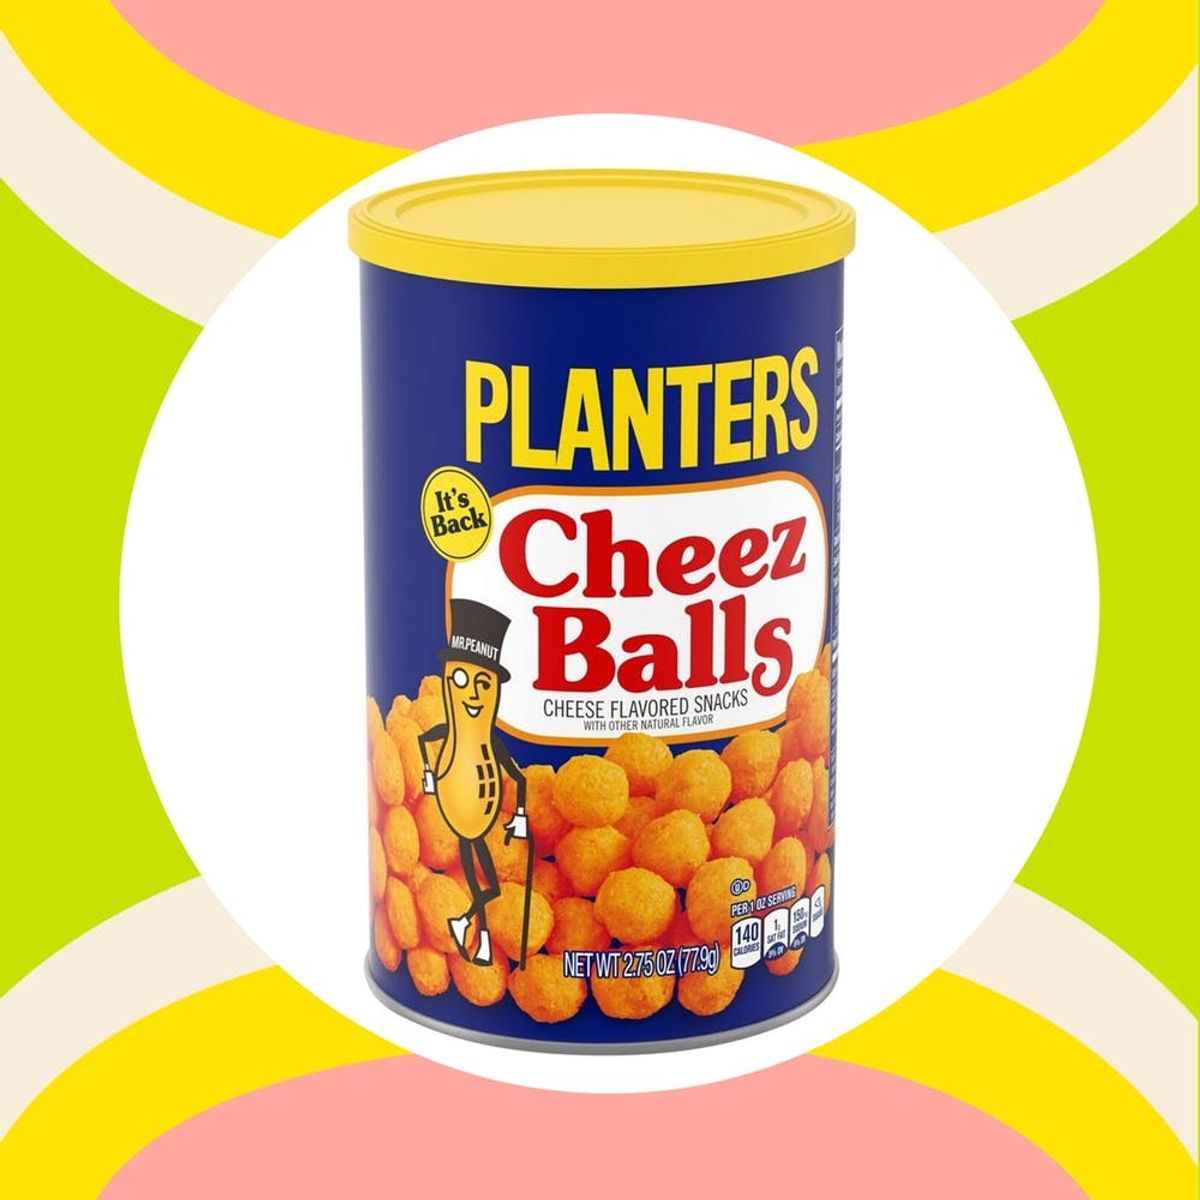 Planters Cheez Balls Are Back After More Than a Decade